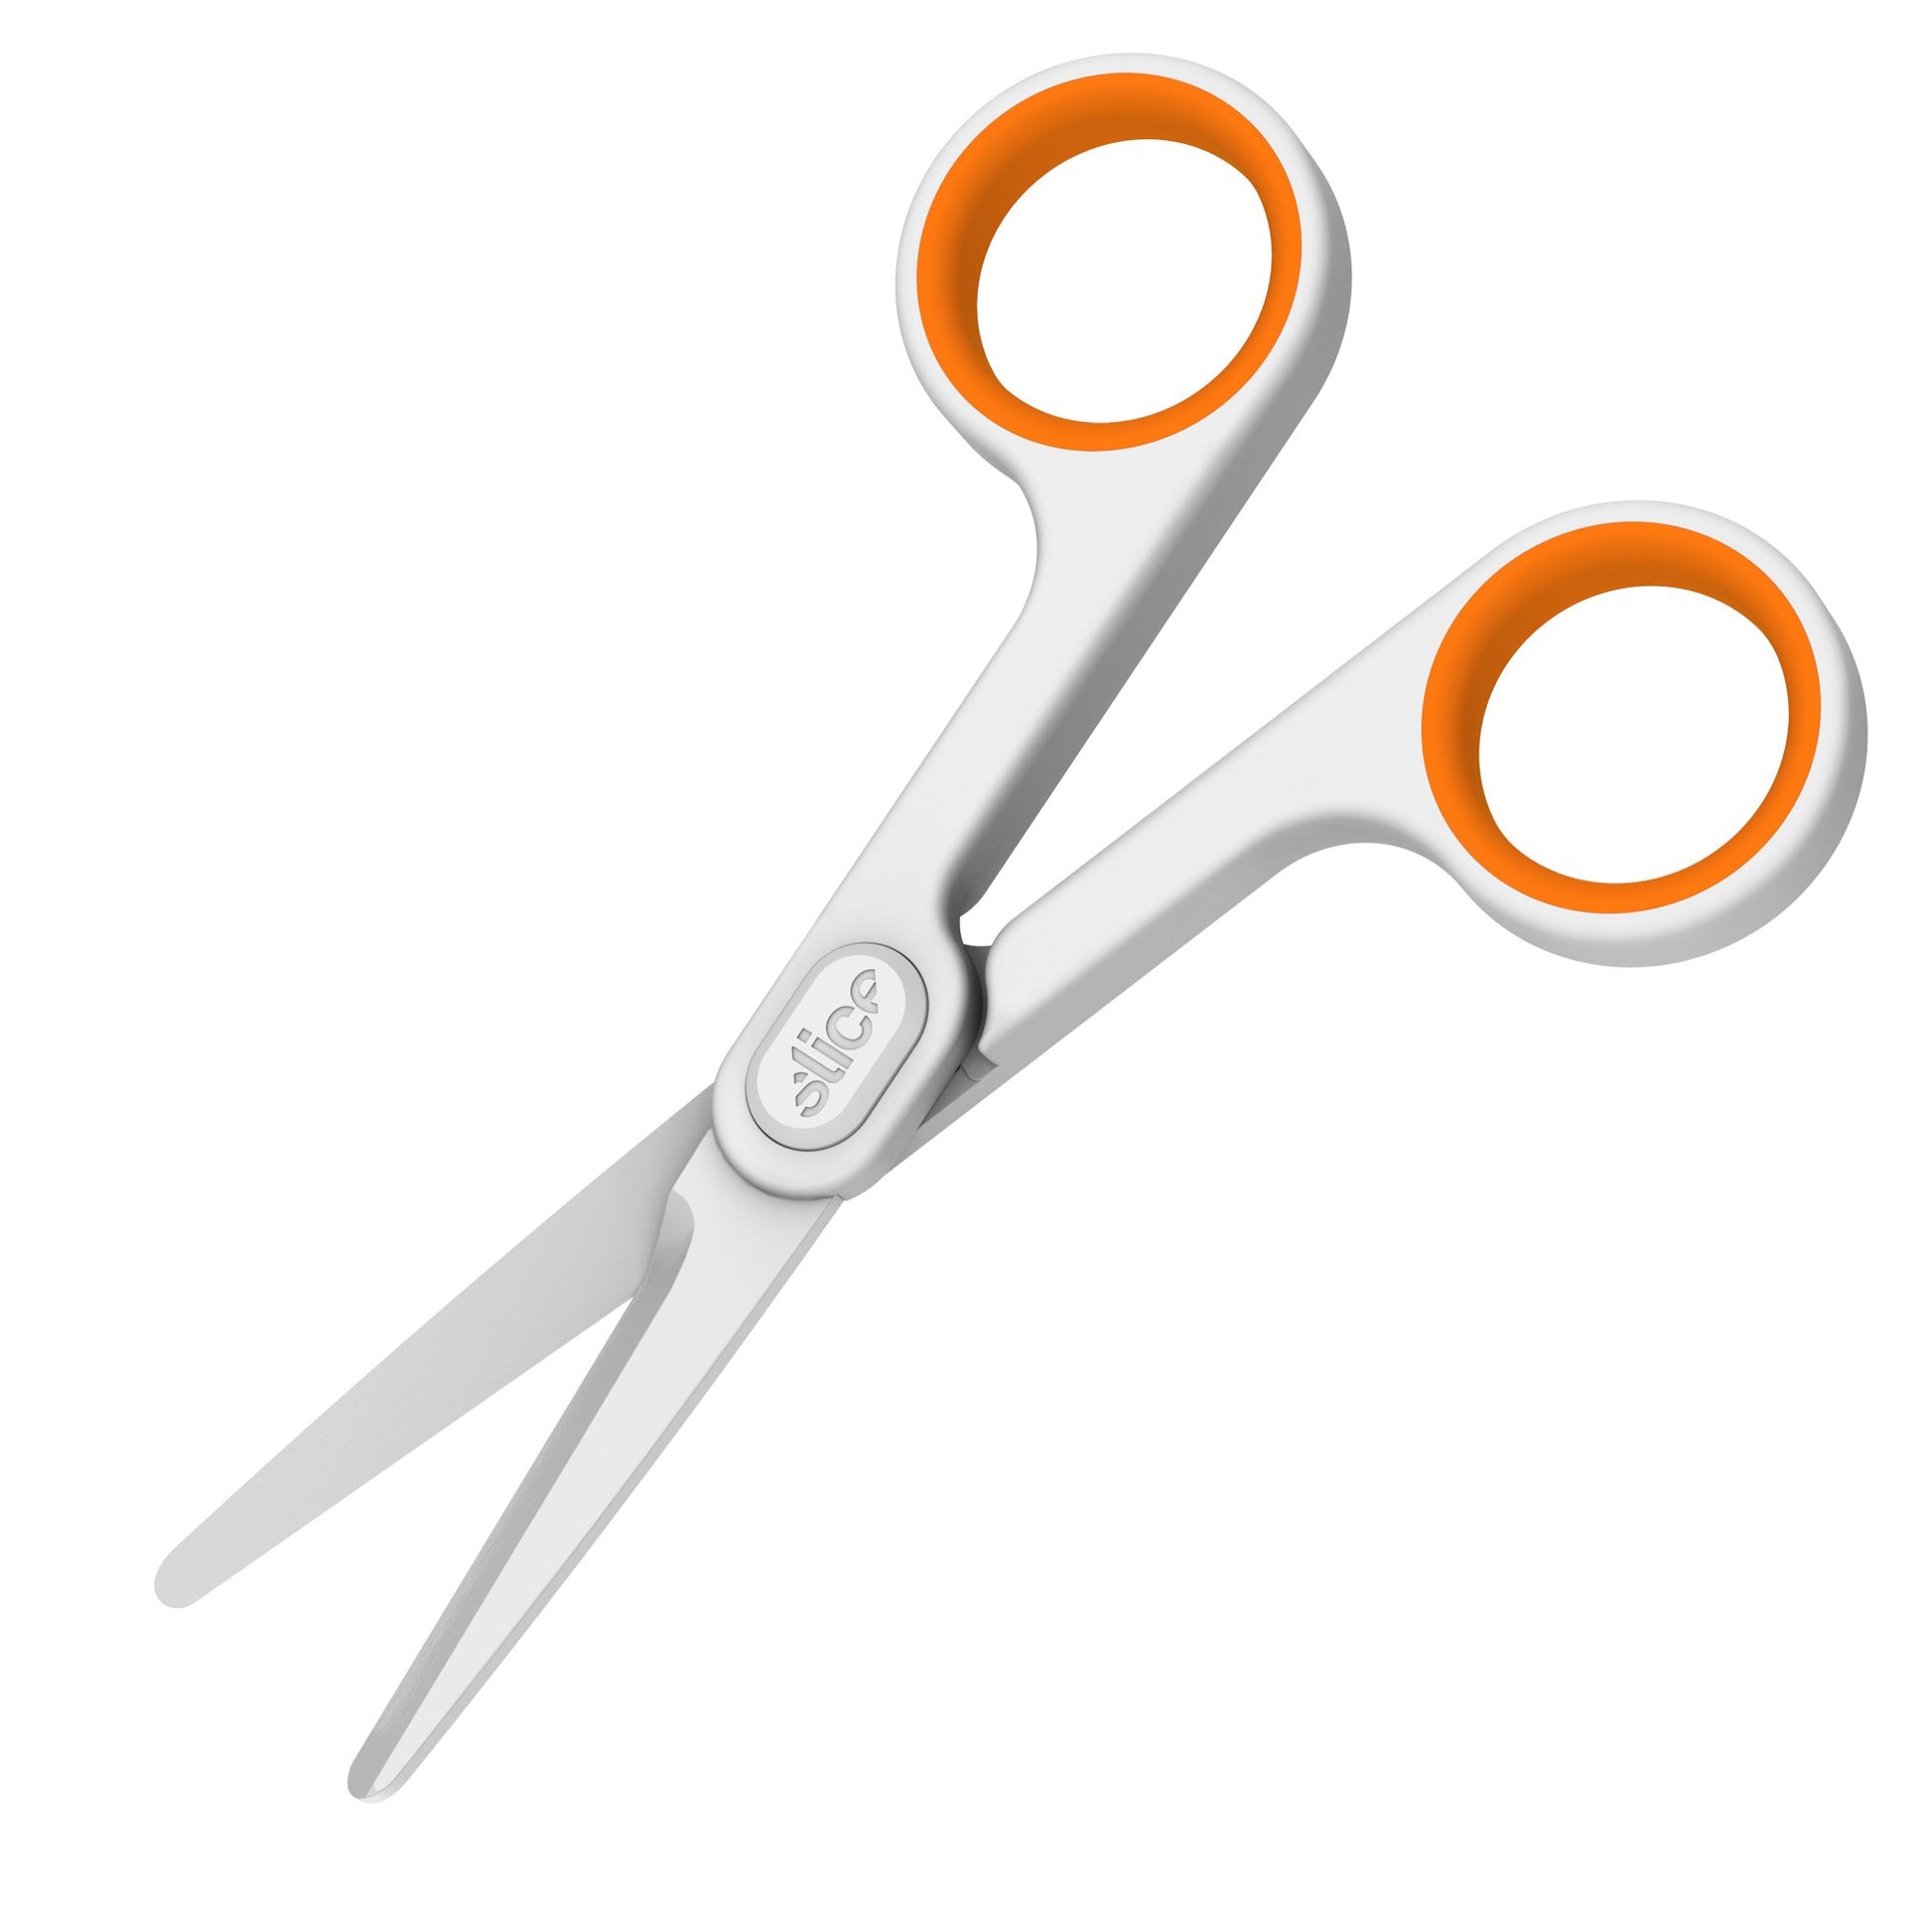 Did you know Klein makes some really good scissors? These